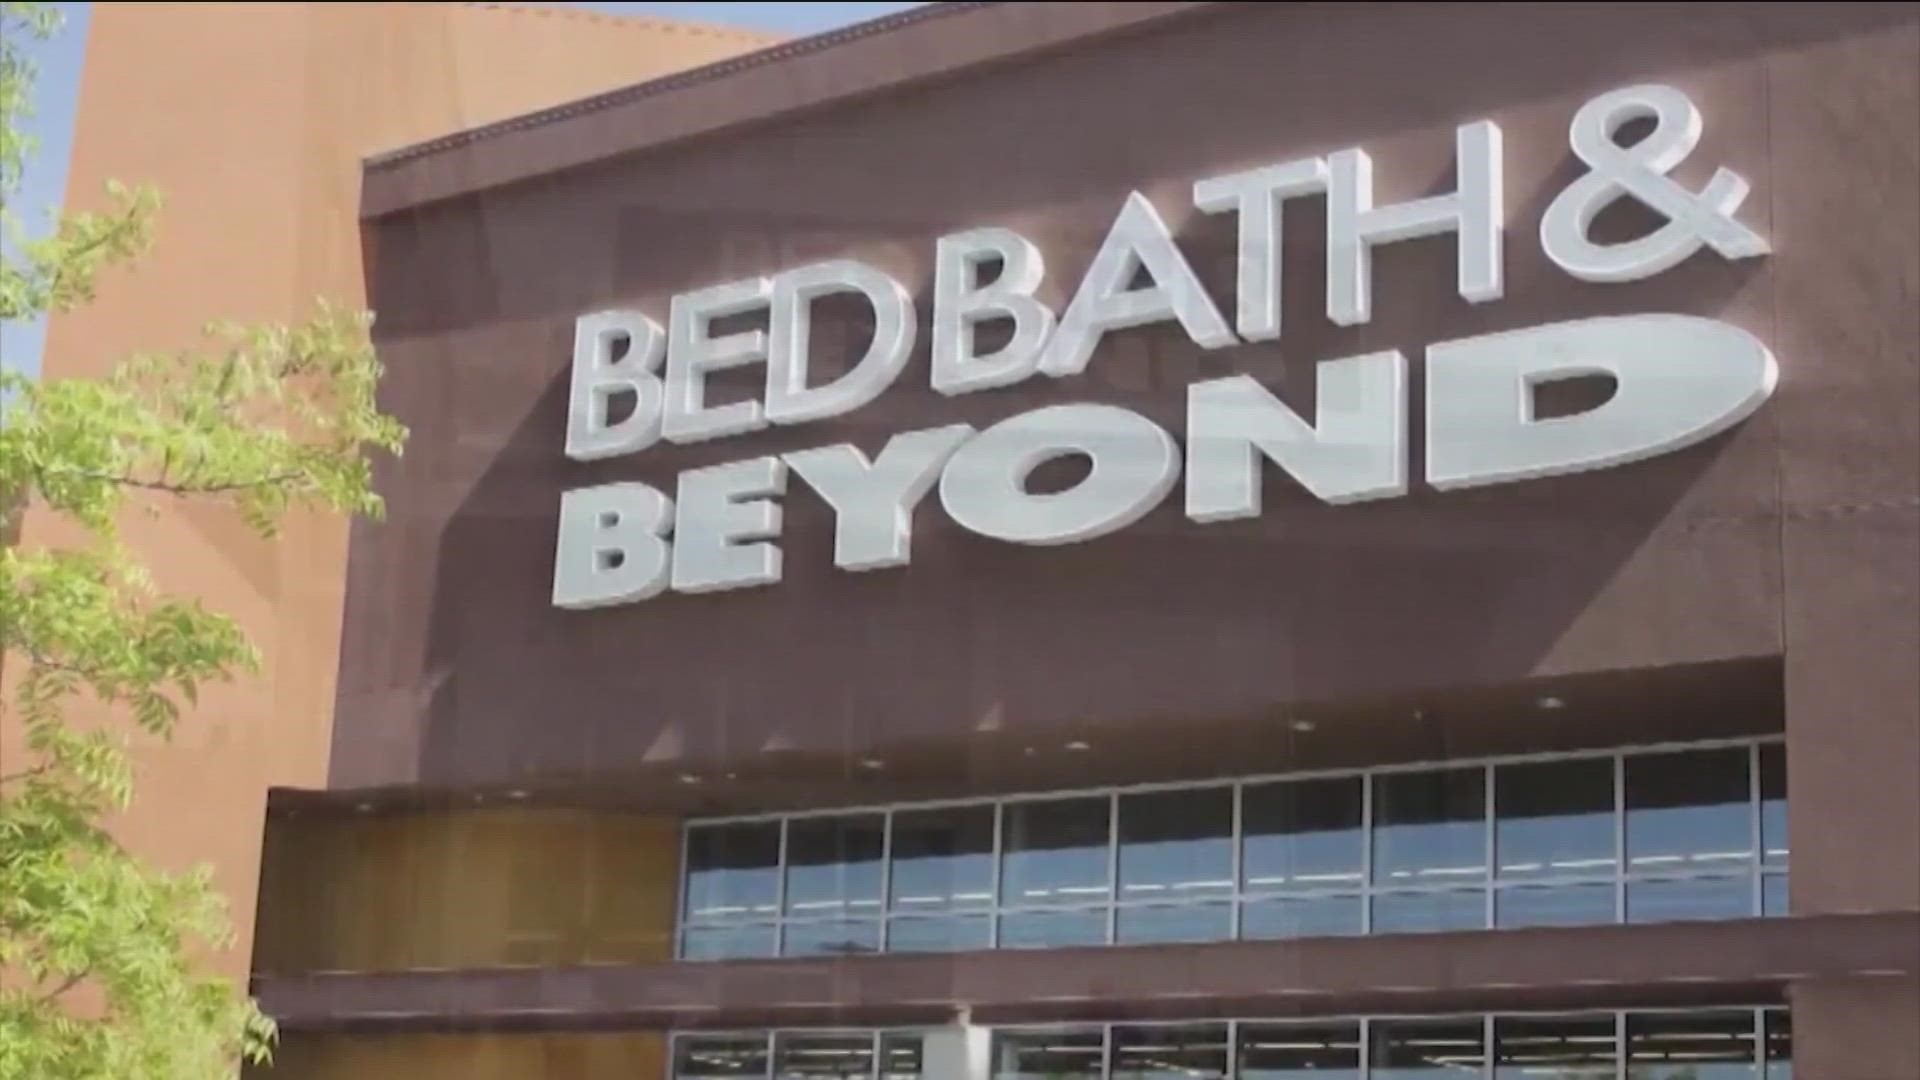 Bed Bath & Beyond plans to close 150 more stores across the country; just one week after the company announced they were closing 90 stores.